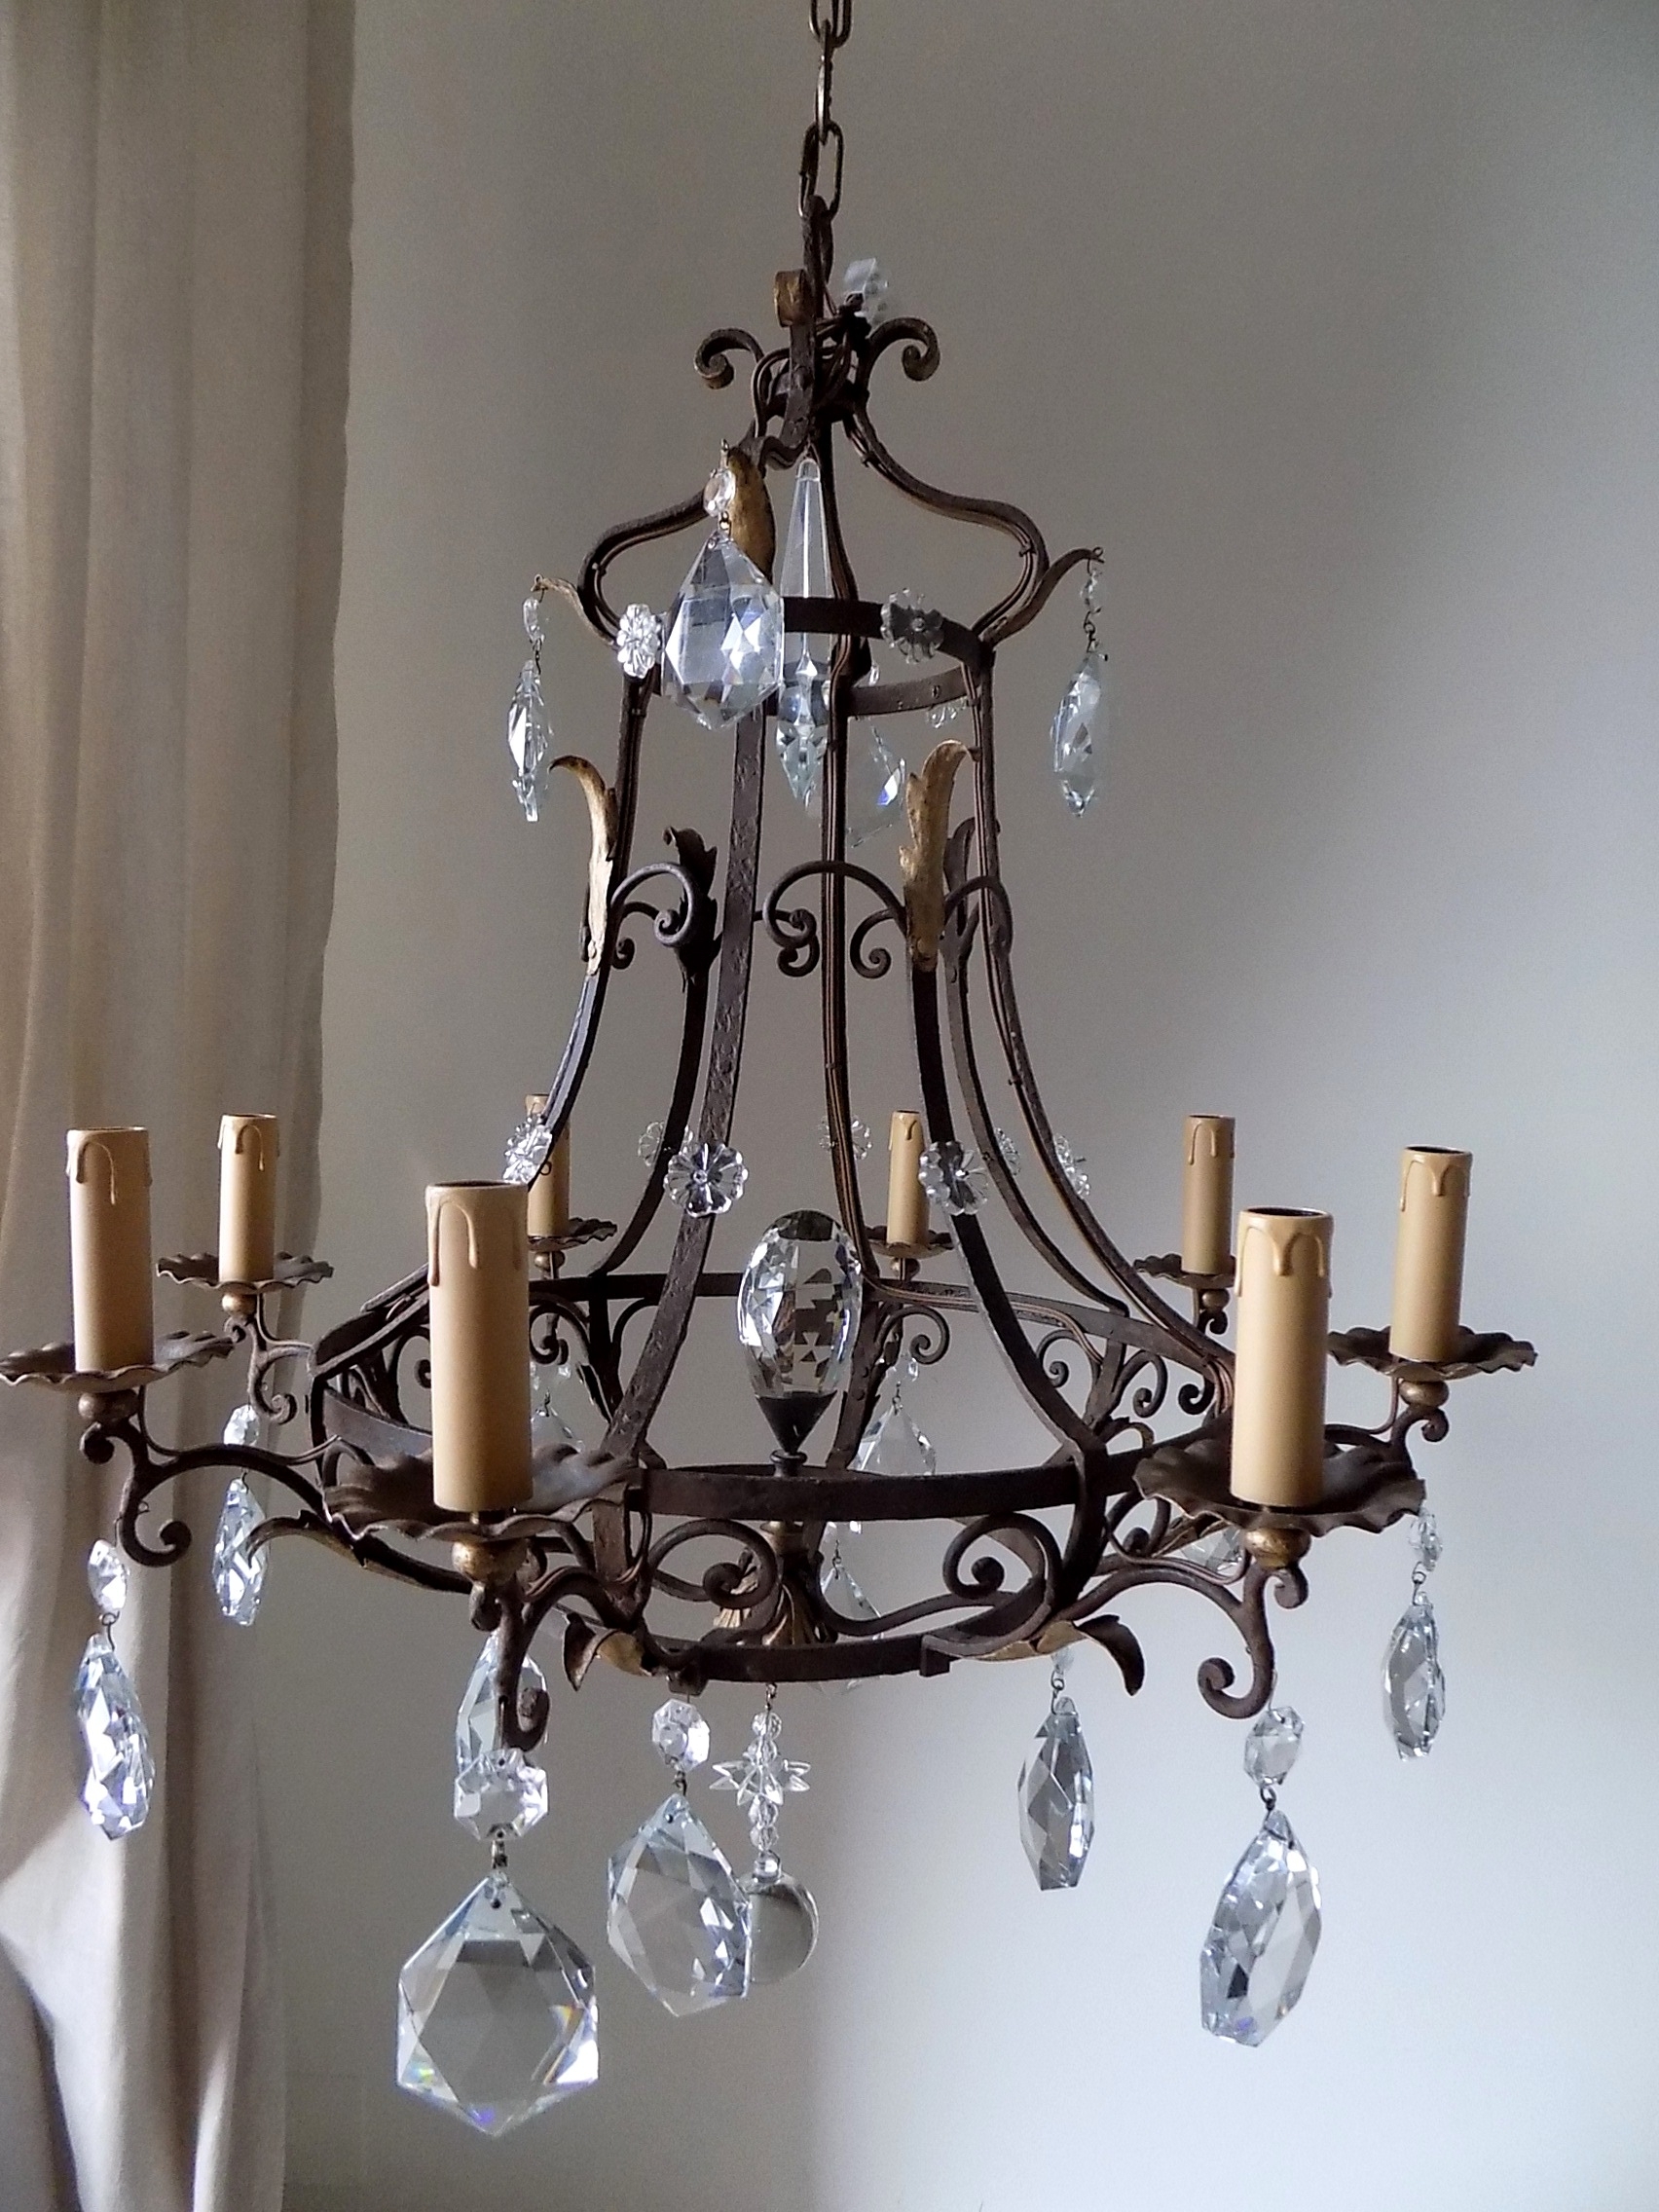 20 Best Collection Of Wrought Iron Chandelier 